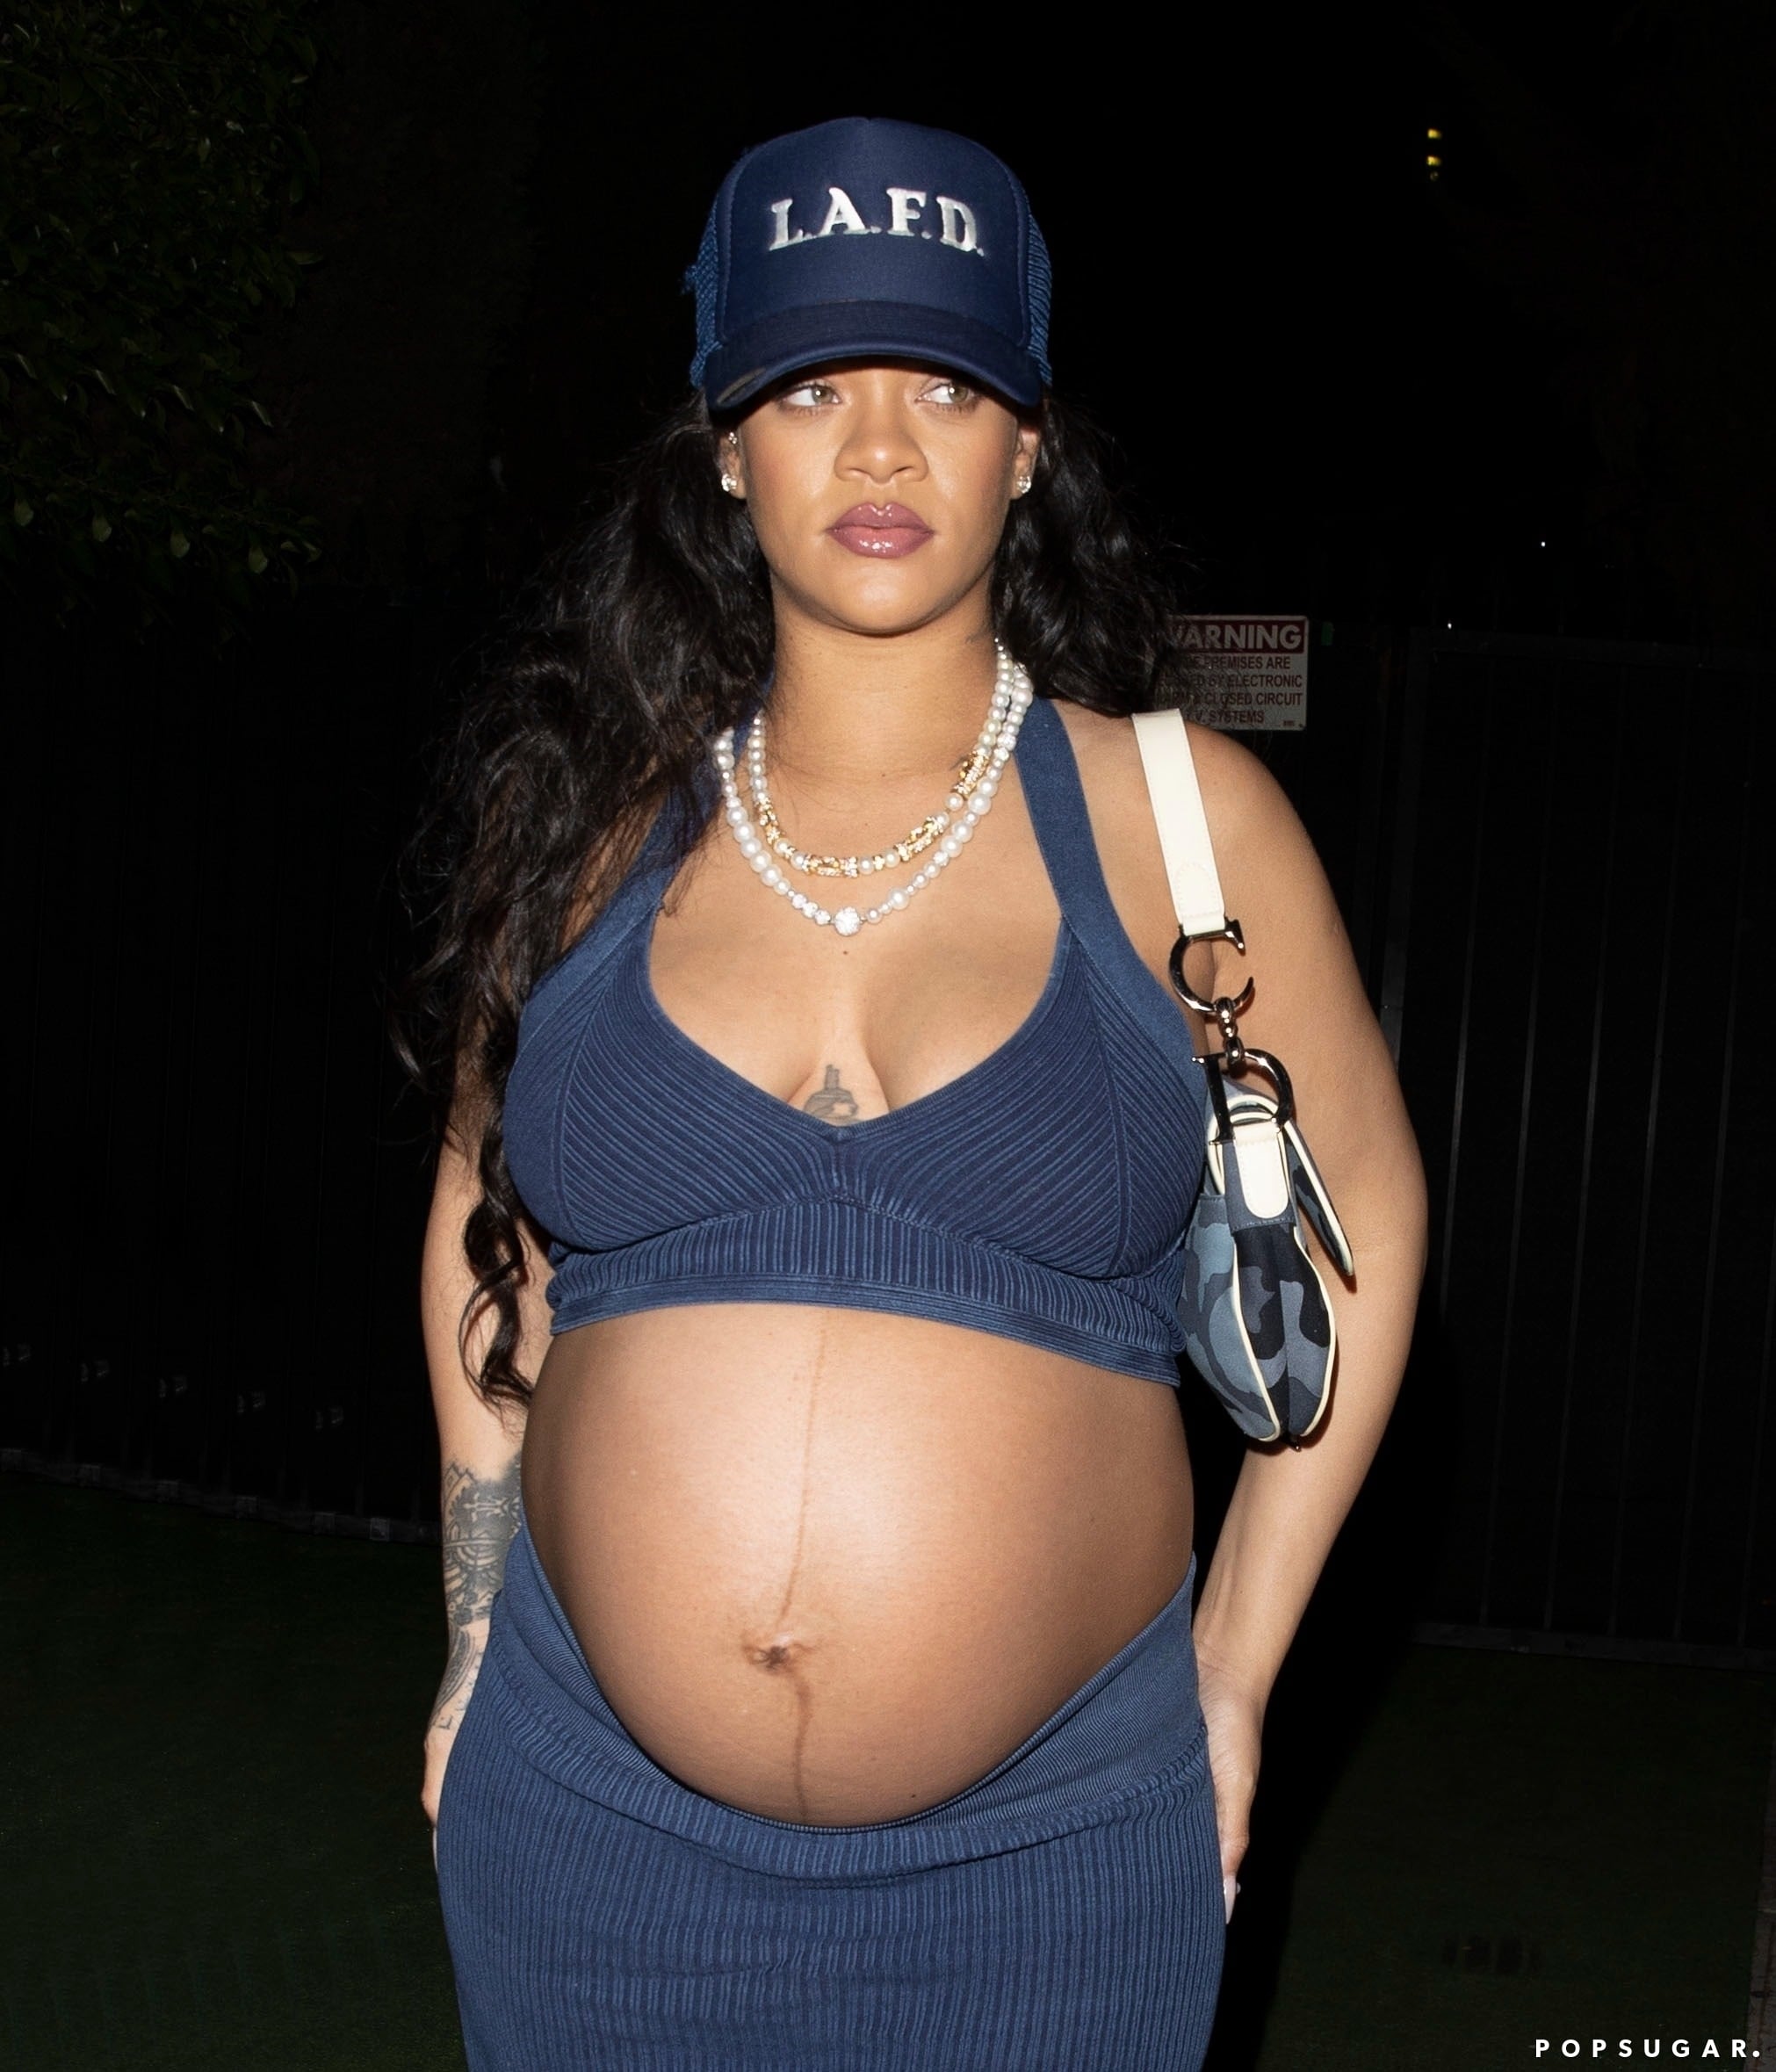 Pregnant Rihanna showcases her growing baby bump in lingerie to